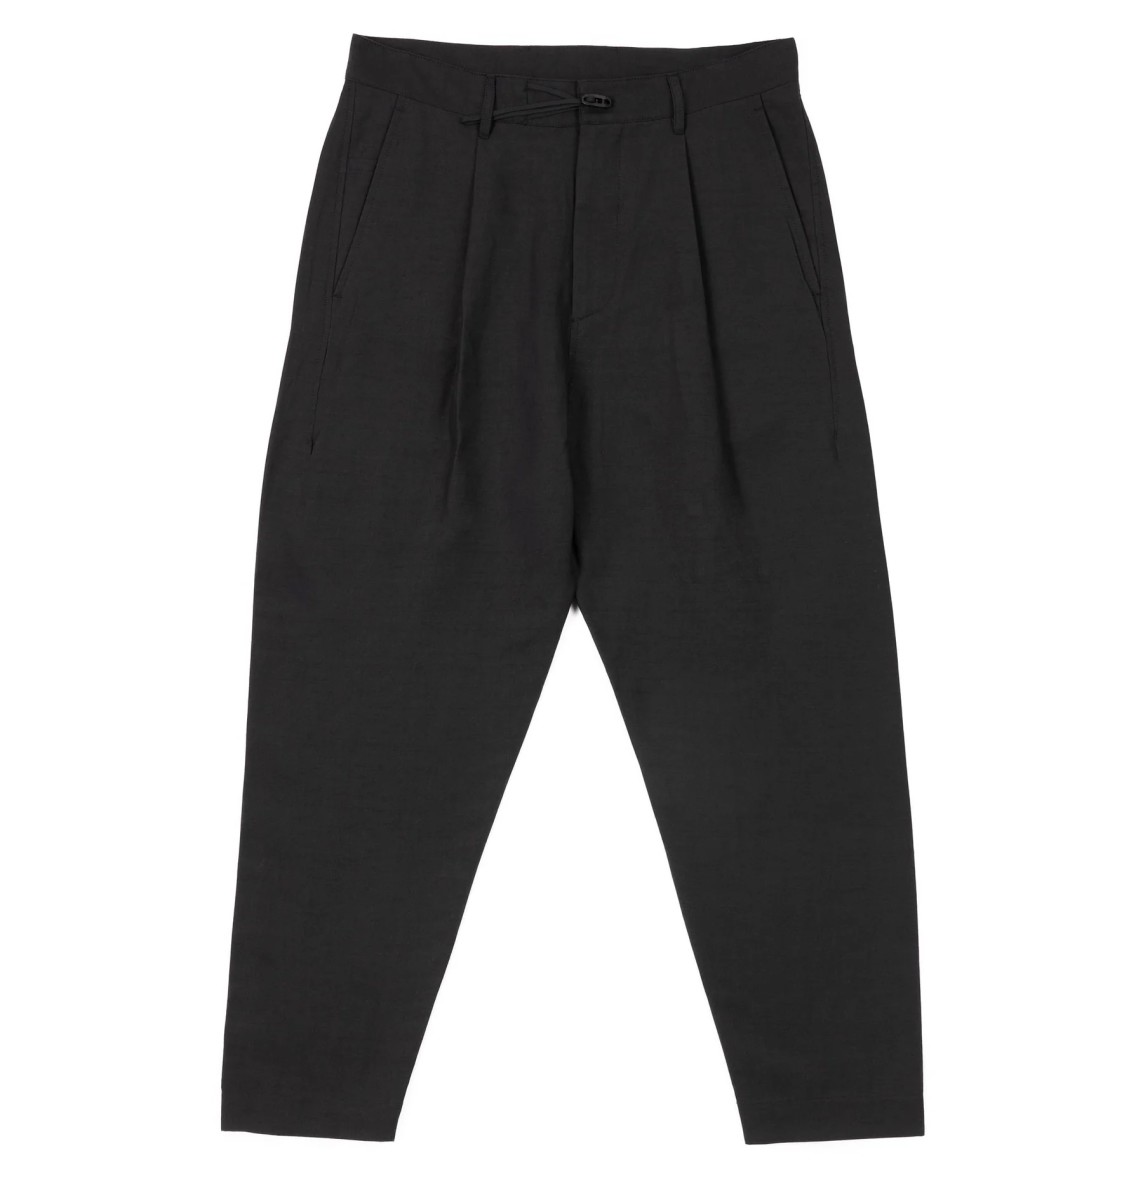 Outlier brings high waist adjustability with the Injex Highdart ...